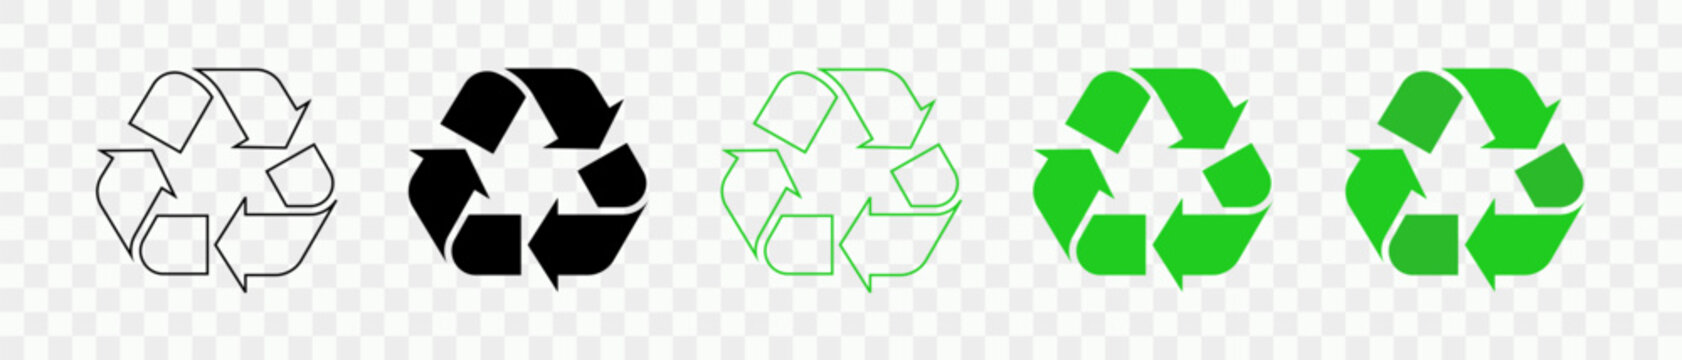 Ser of recycle icons set. Black and green recycle symbol. Vector illsutration.